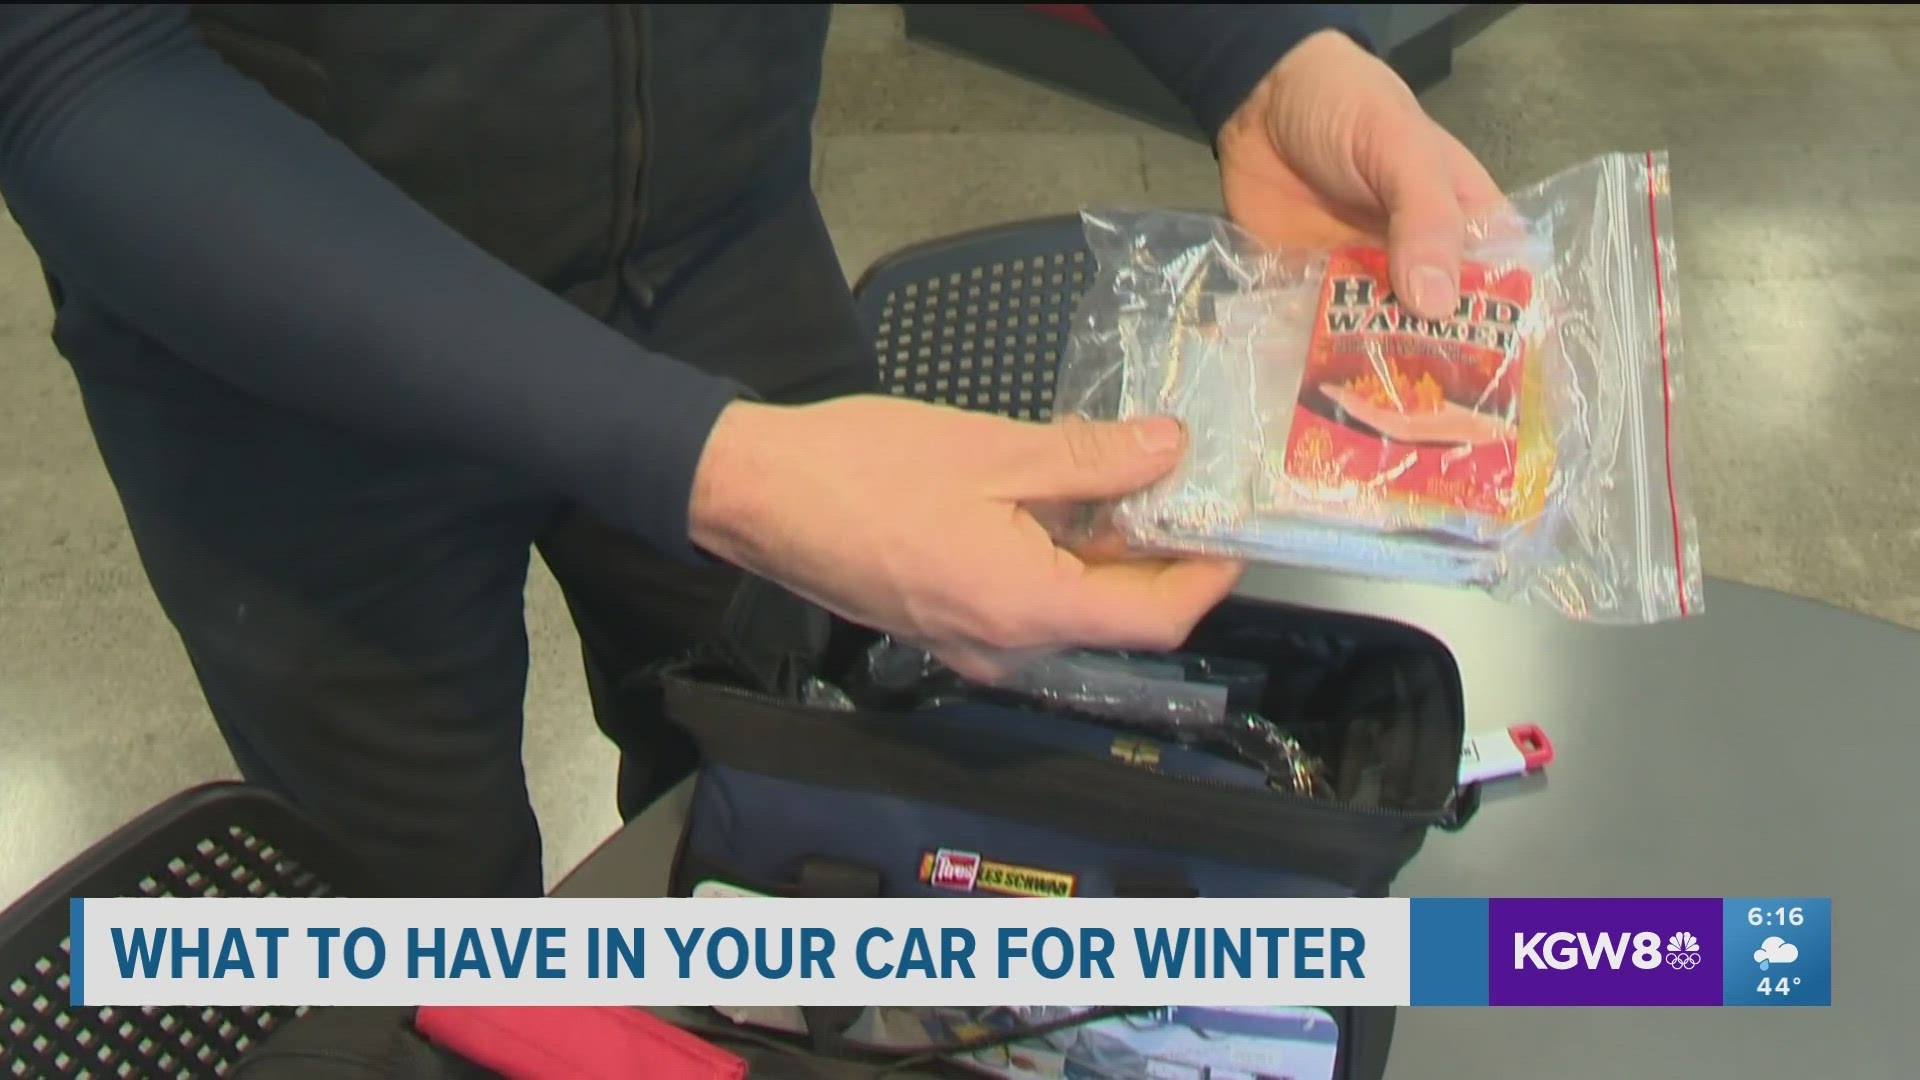 Winter Emergency Essentials to Pack in Your Car